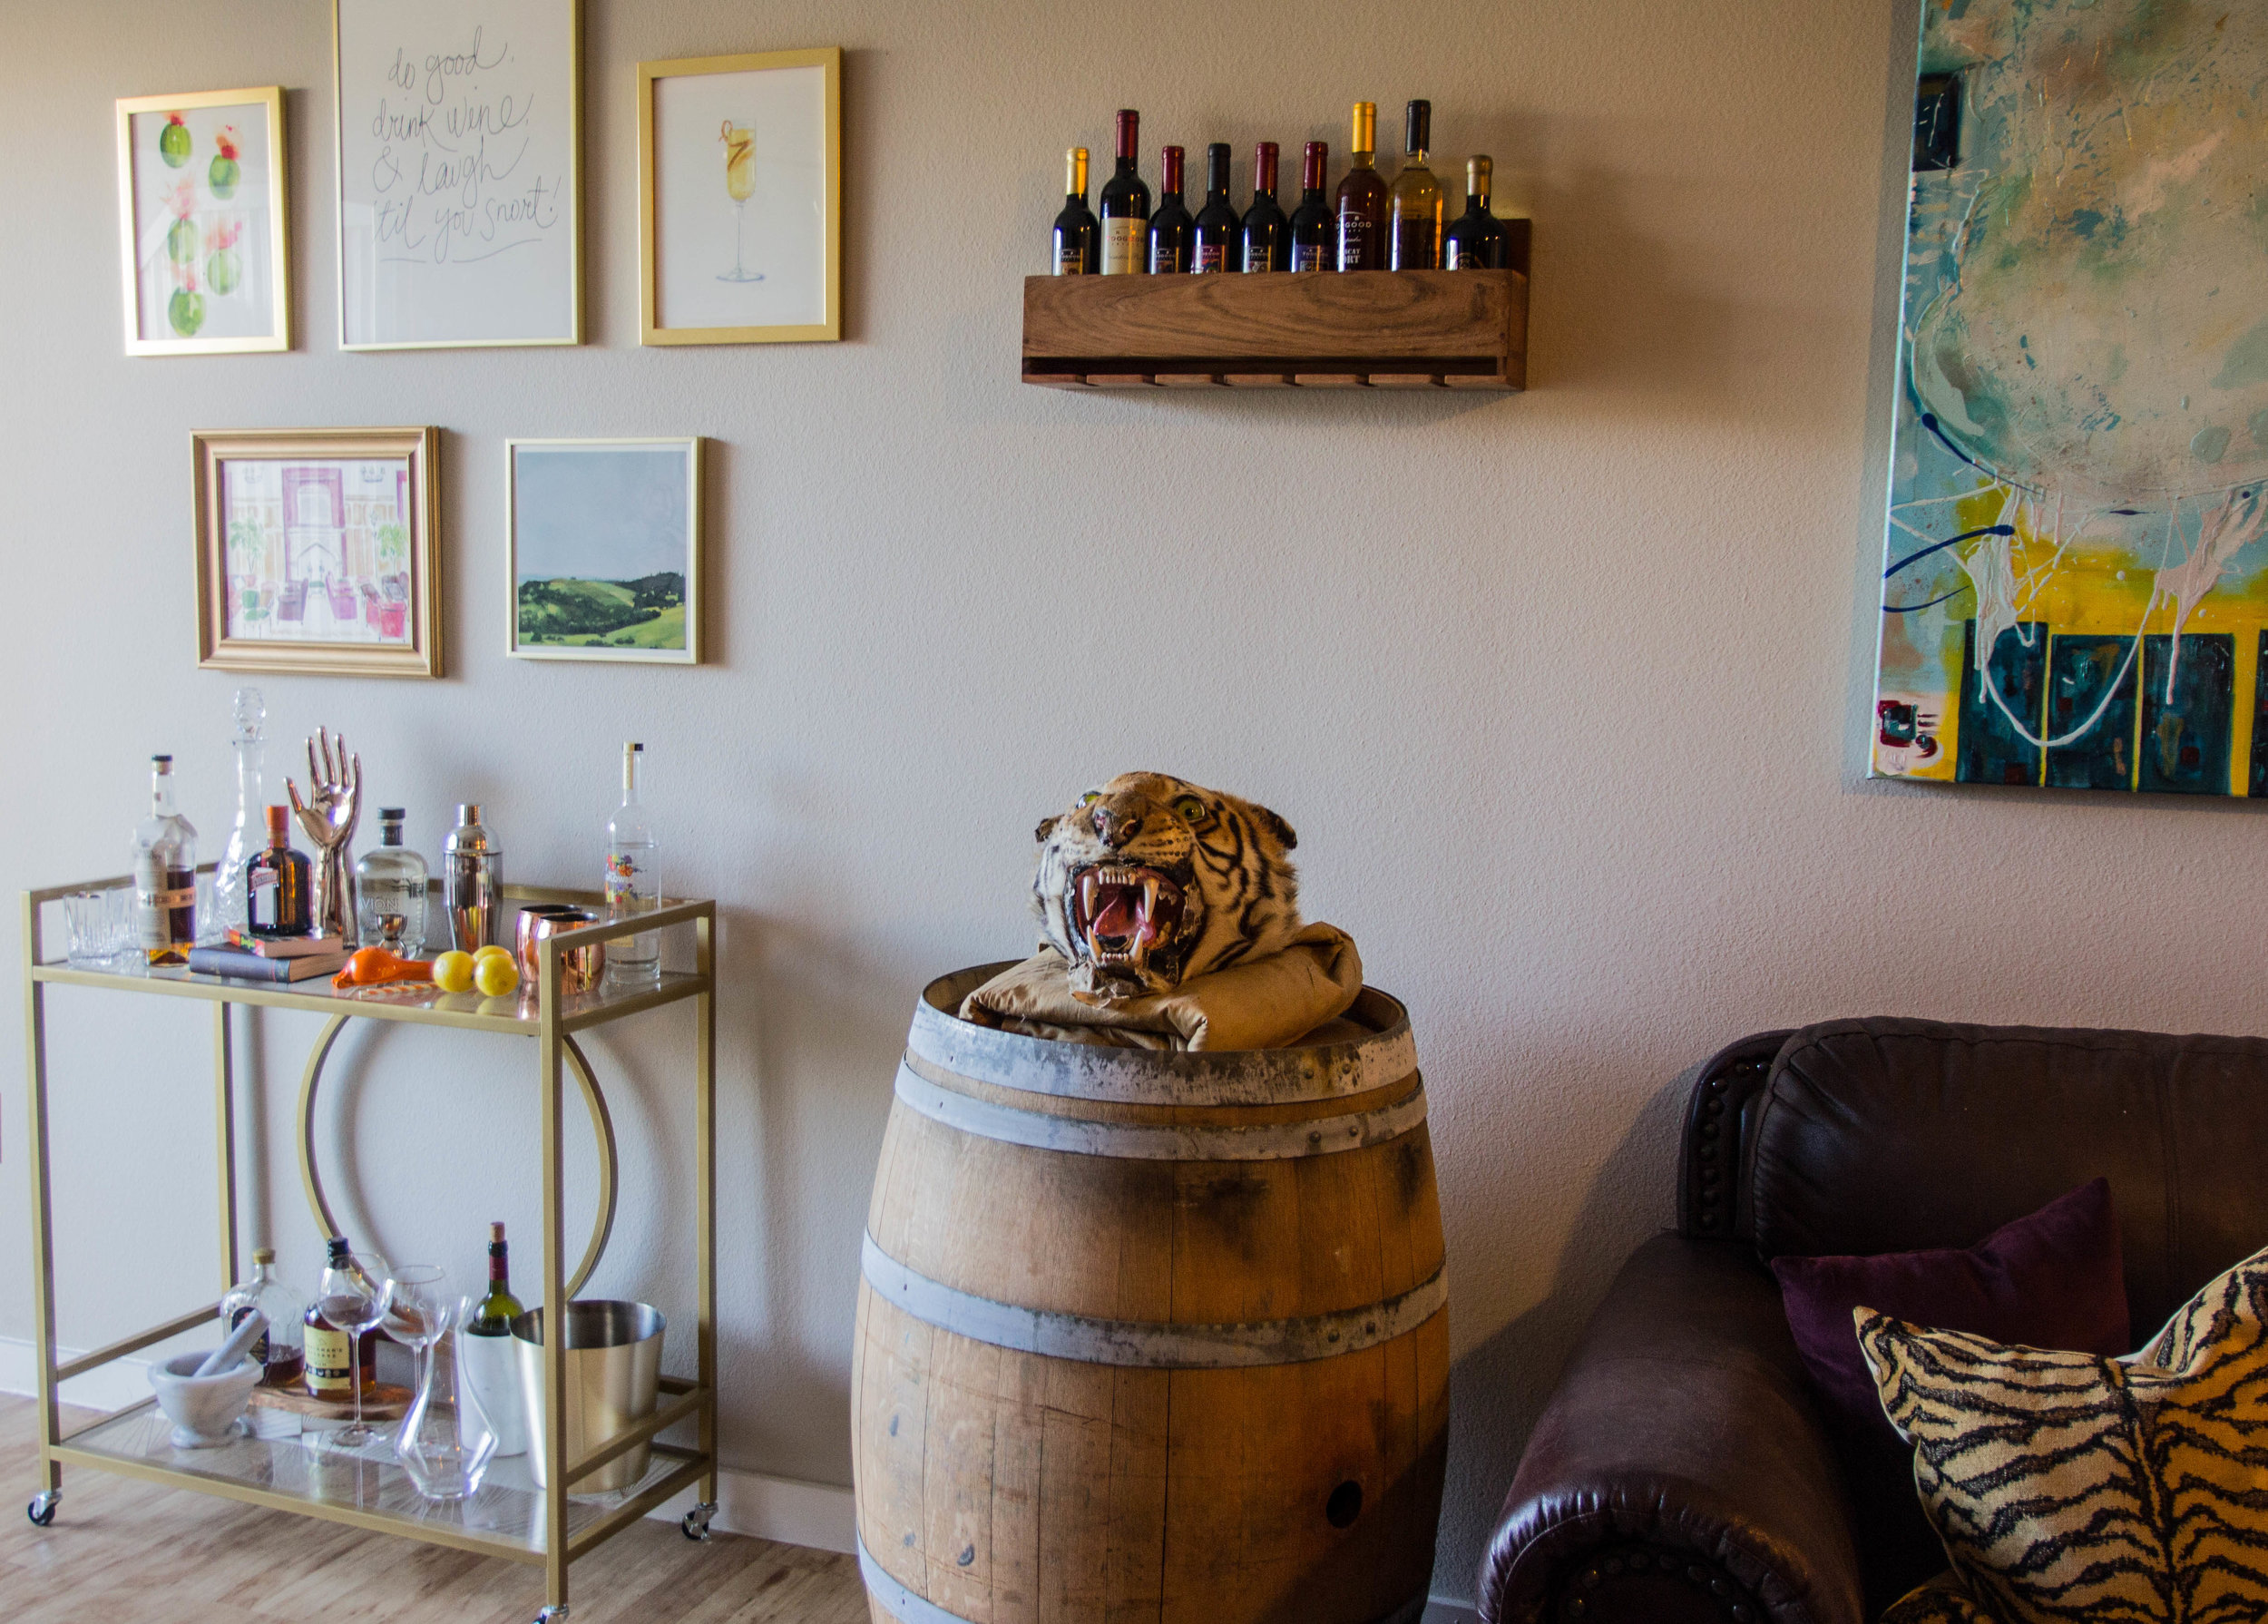 How to Decorate a Bar Cart Gallery Wall | LMents of Style ...